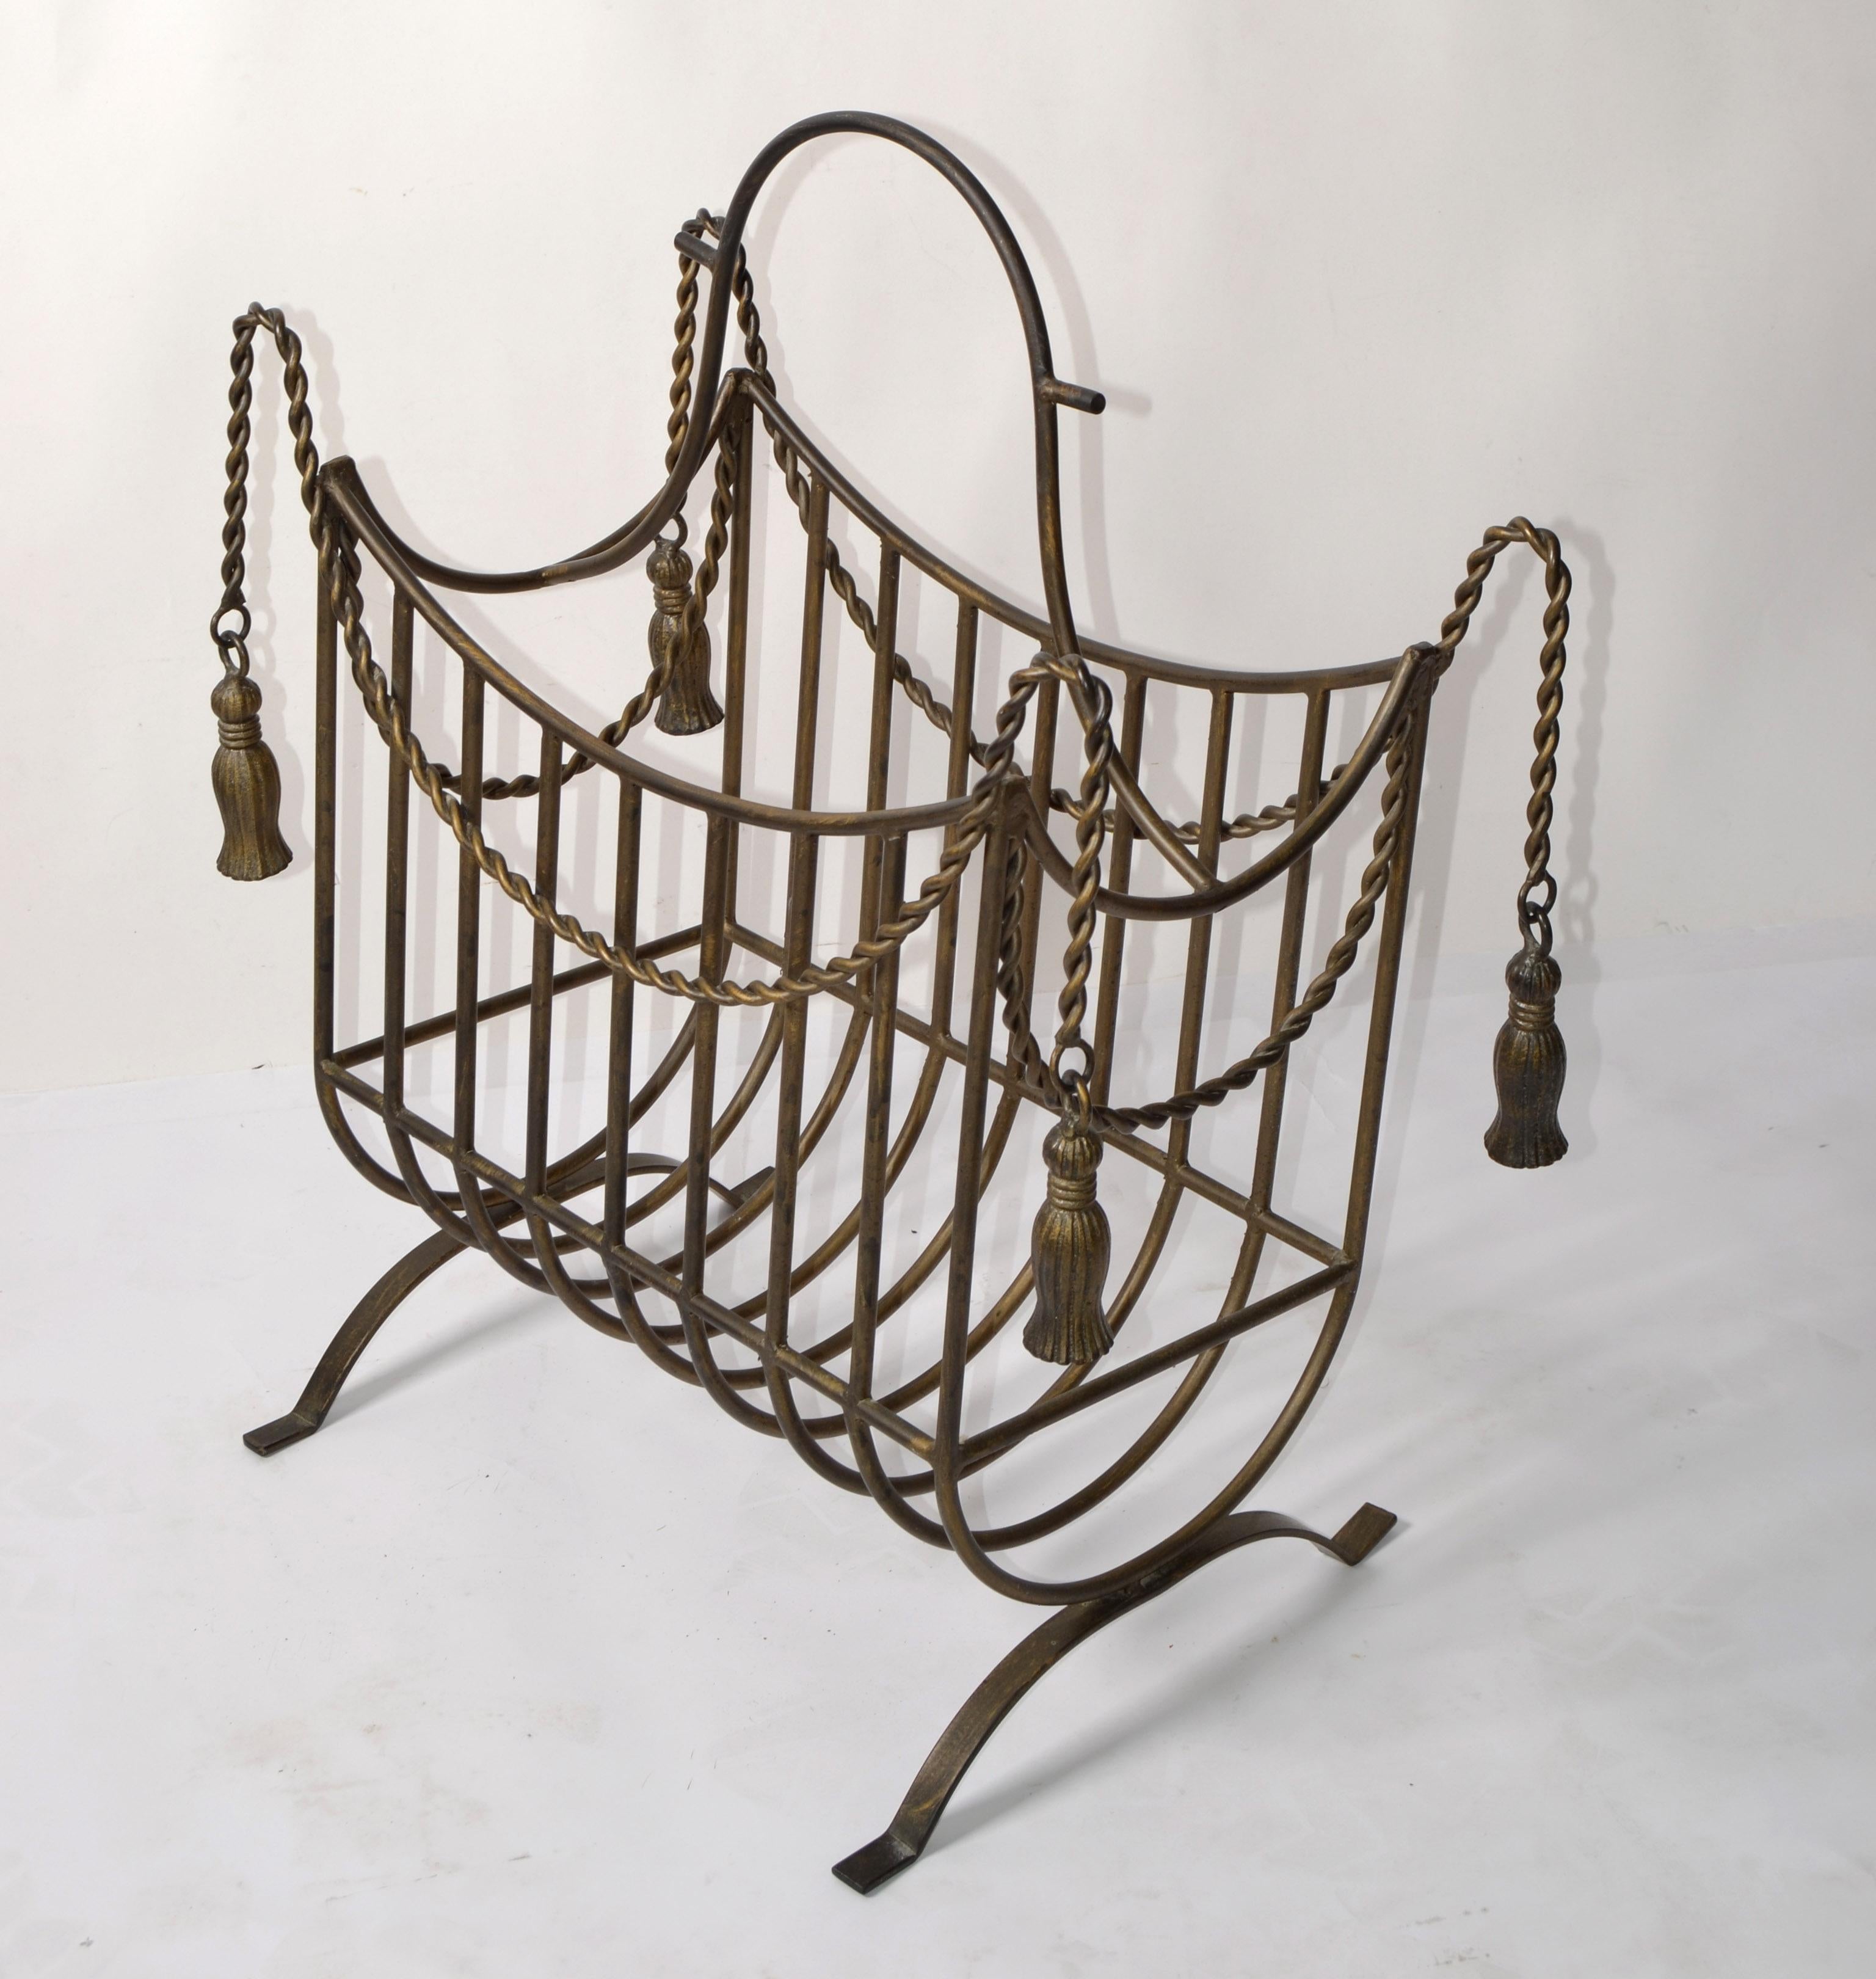 Large Magazine Rack in the Style of Maison Jansen in Wrought Iron hand-crafted in detailed Braided Rope and Tassels Design.
Made in Italy in the late 1960 for heavy Books, Magazines, Atlas, Dictionary and Cookbooks.
The gold finish on the Wrought